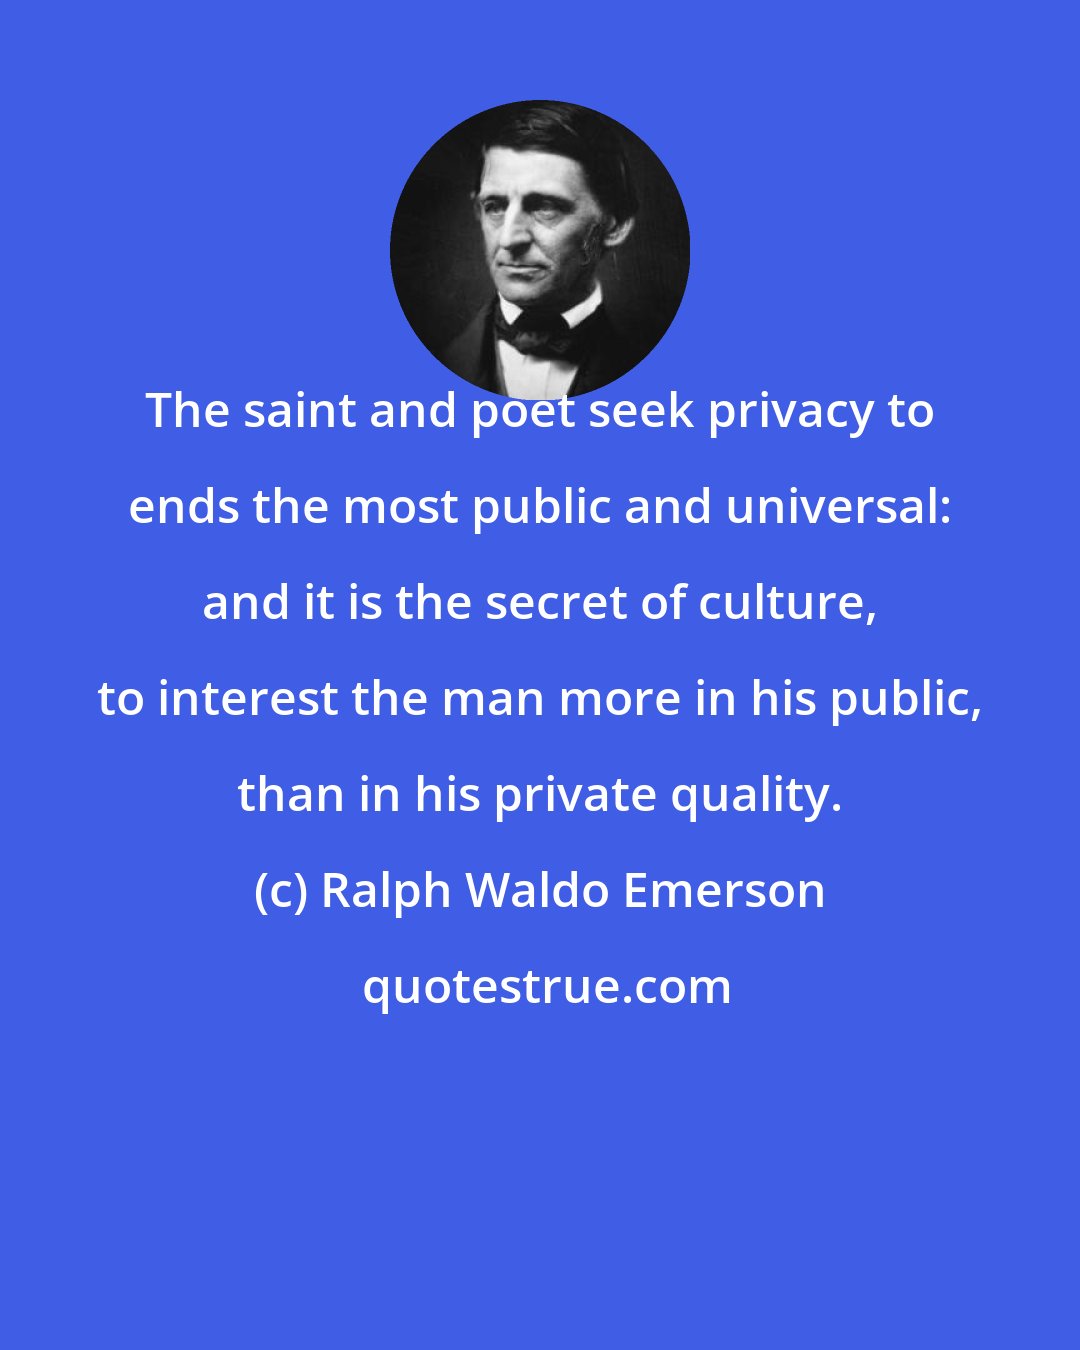 Ralph Waldo Emerson: The saint and poet seek privacy to ends the most public and universal: and it is the secret of culture, to interest the man more in his public, than in his private quality.